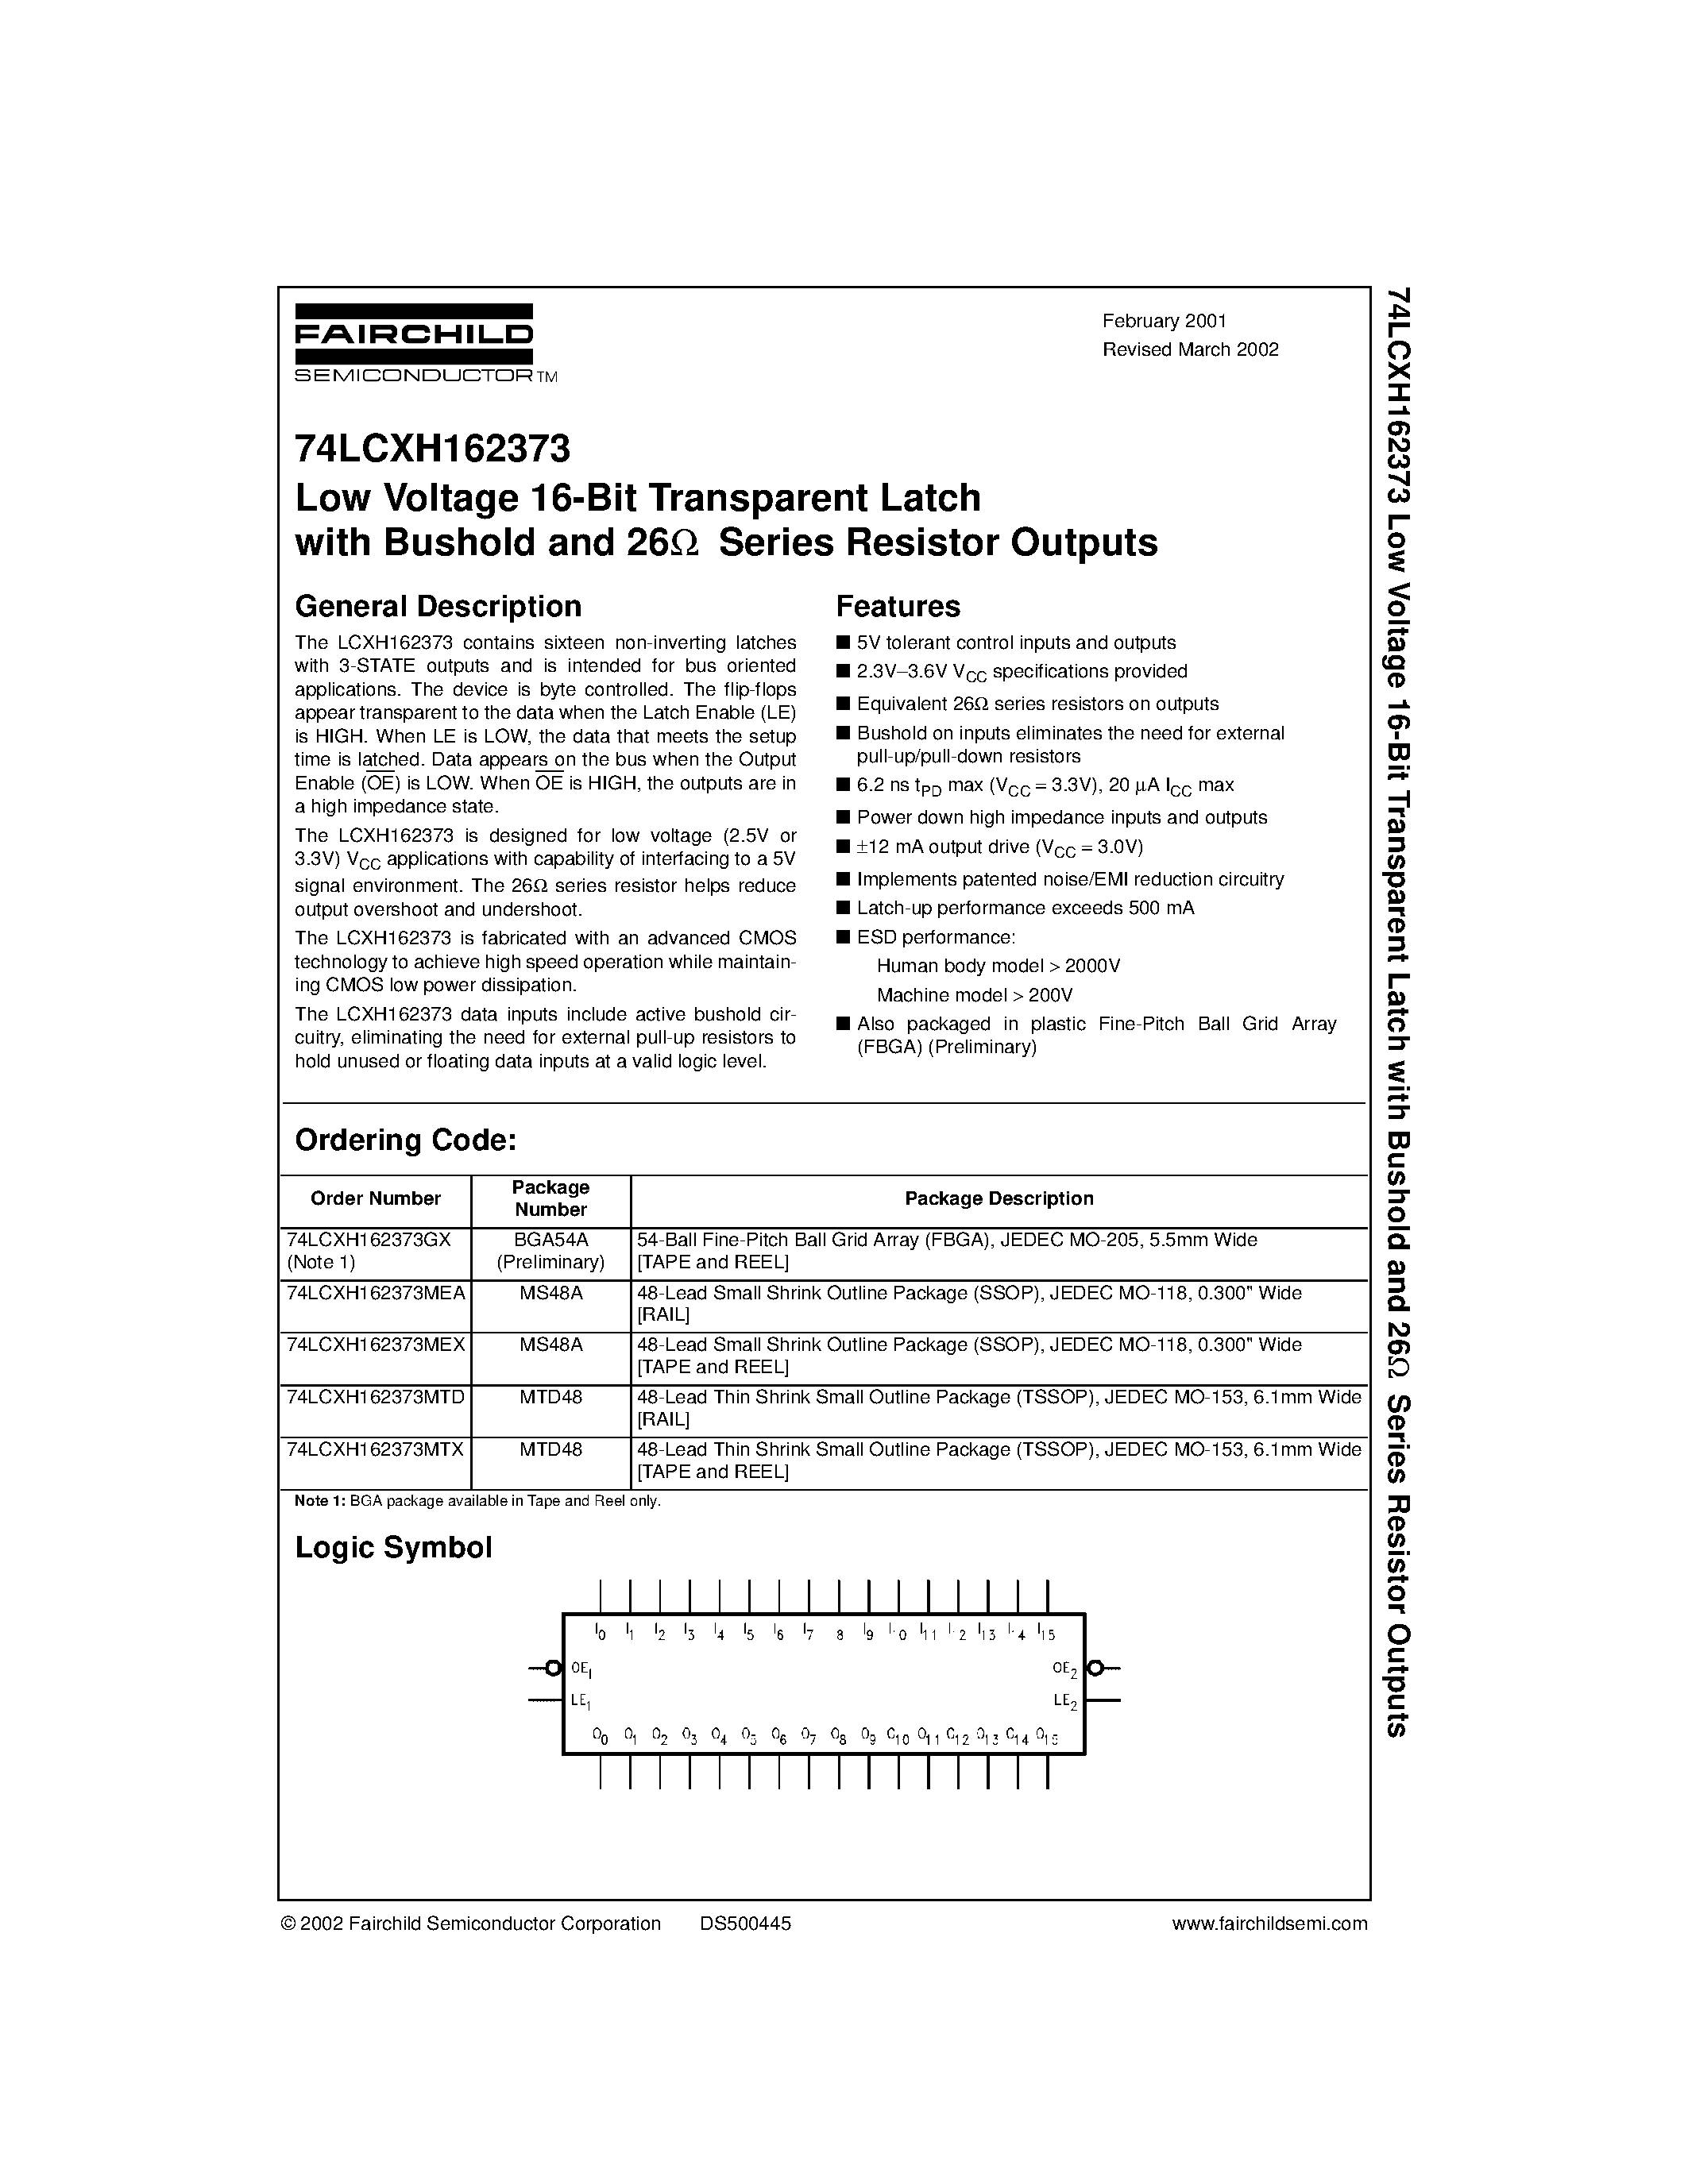 Datasheet 74LCXH162373MEA - Low Voltage 16-Bit Transparent Latch with Bushold and 26 Series Resistor Outputs page 1